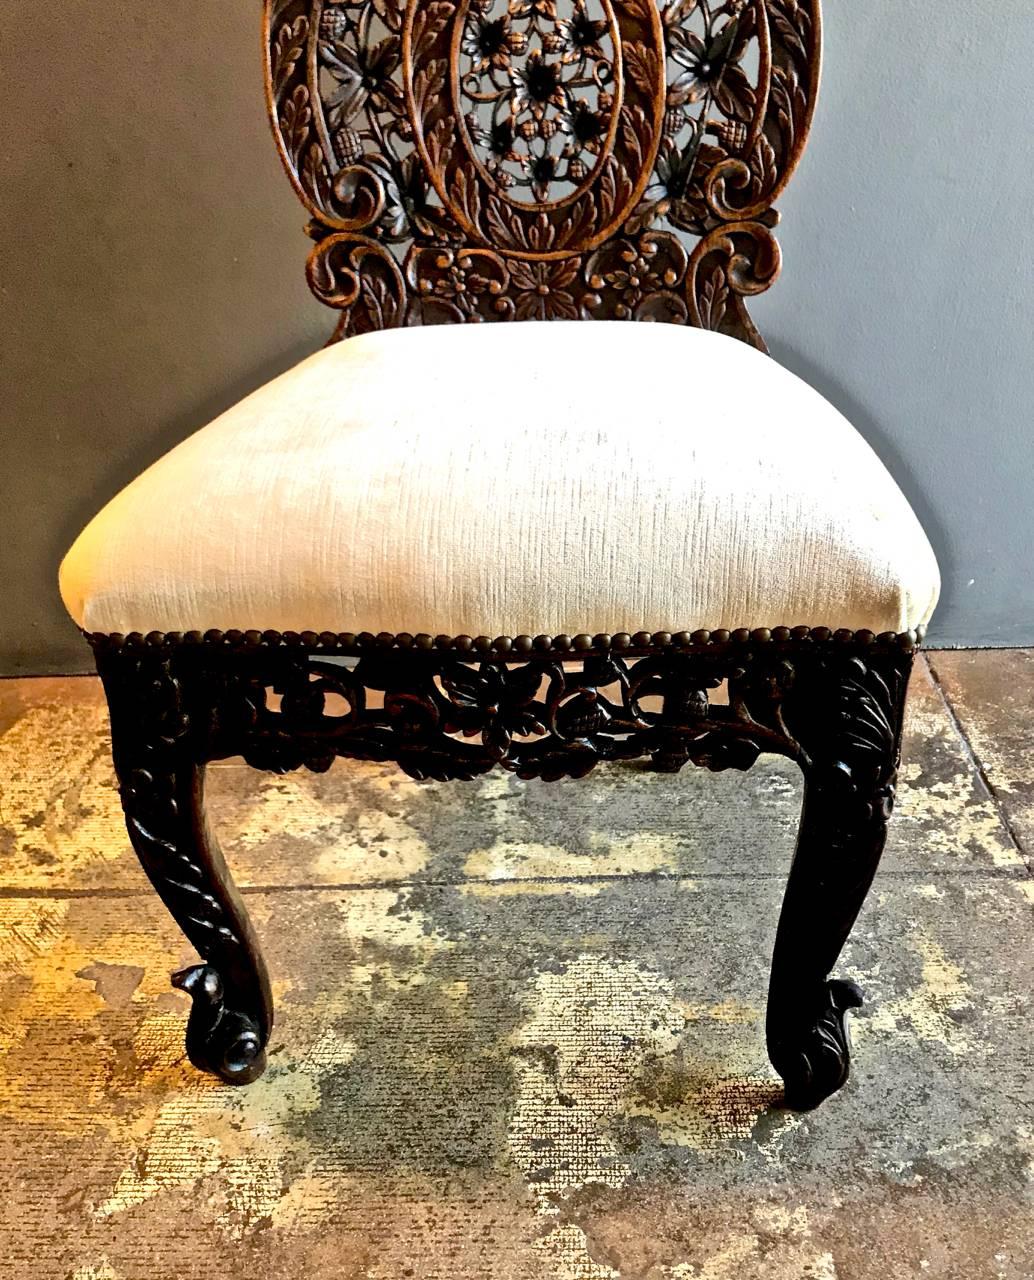 This is a intricately carved sculptural rosewood Anglo-Indian side chair that has been newly upholstered in a very light gold-toned Italian silk velvet. The chairs is in good condition with a couple of very old minor restorations. The carving is all